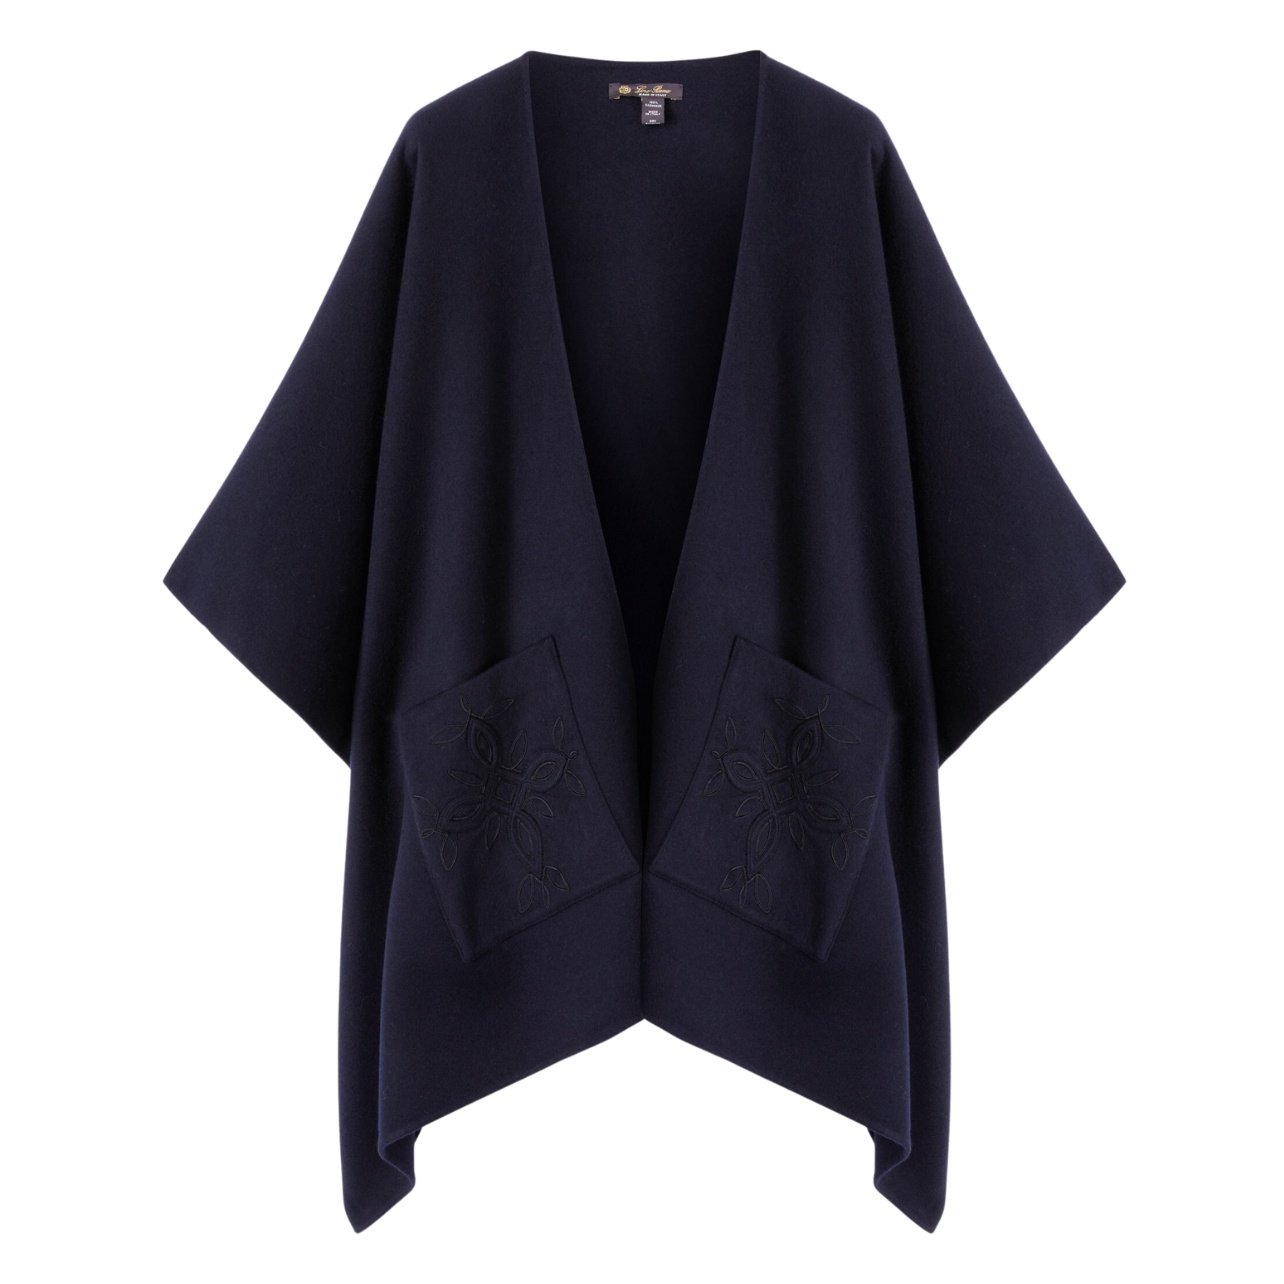 Loro Piana navy blue cashmere cape with embellished front pockets